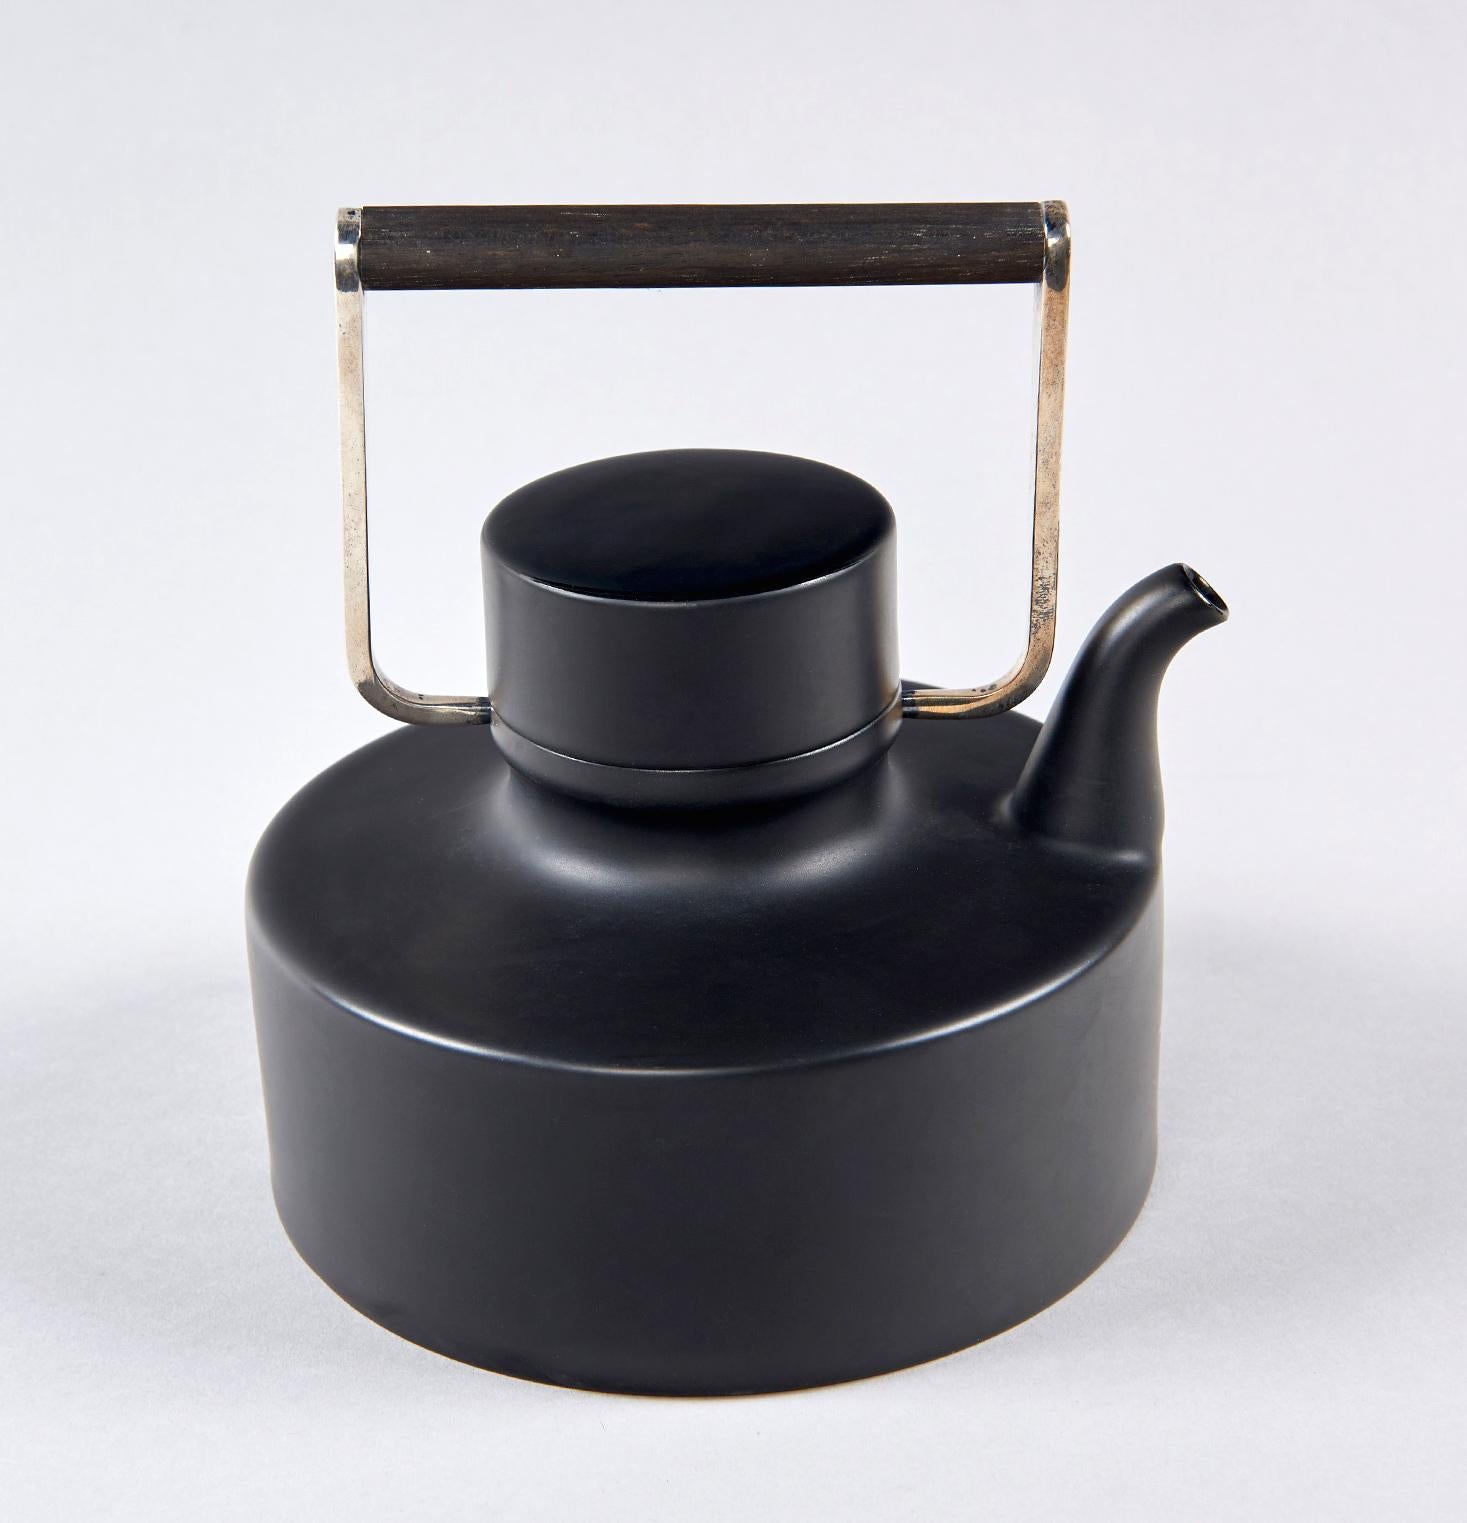 Produced in Germany by Rosenthal from 1963 until 1975 in matte black porcelain (with high gloss to the top of the lid), with a handle of teak and silver-plated brass, this exquisite teapot is unmistakably the product of multidisciplinary Finnish